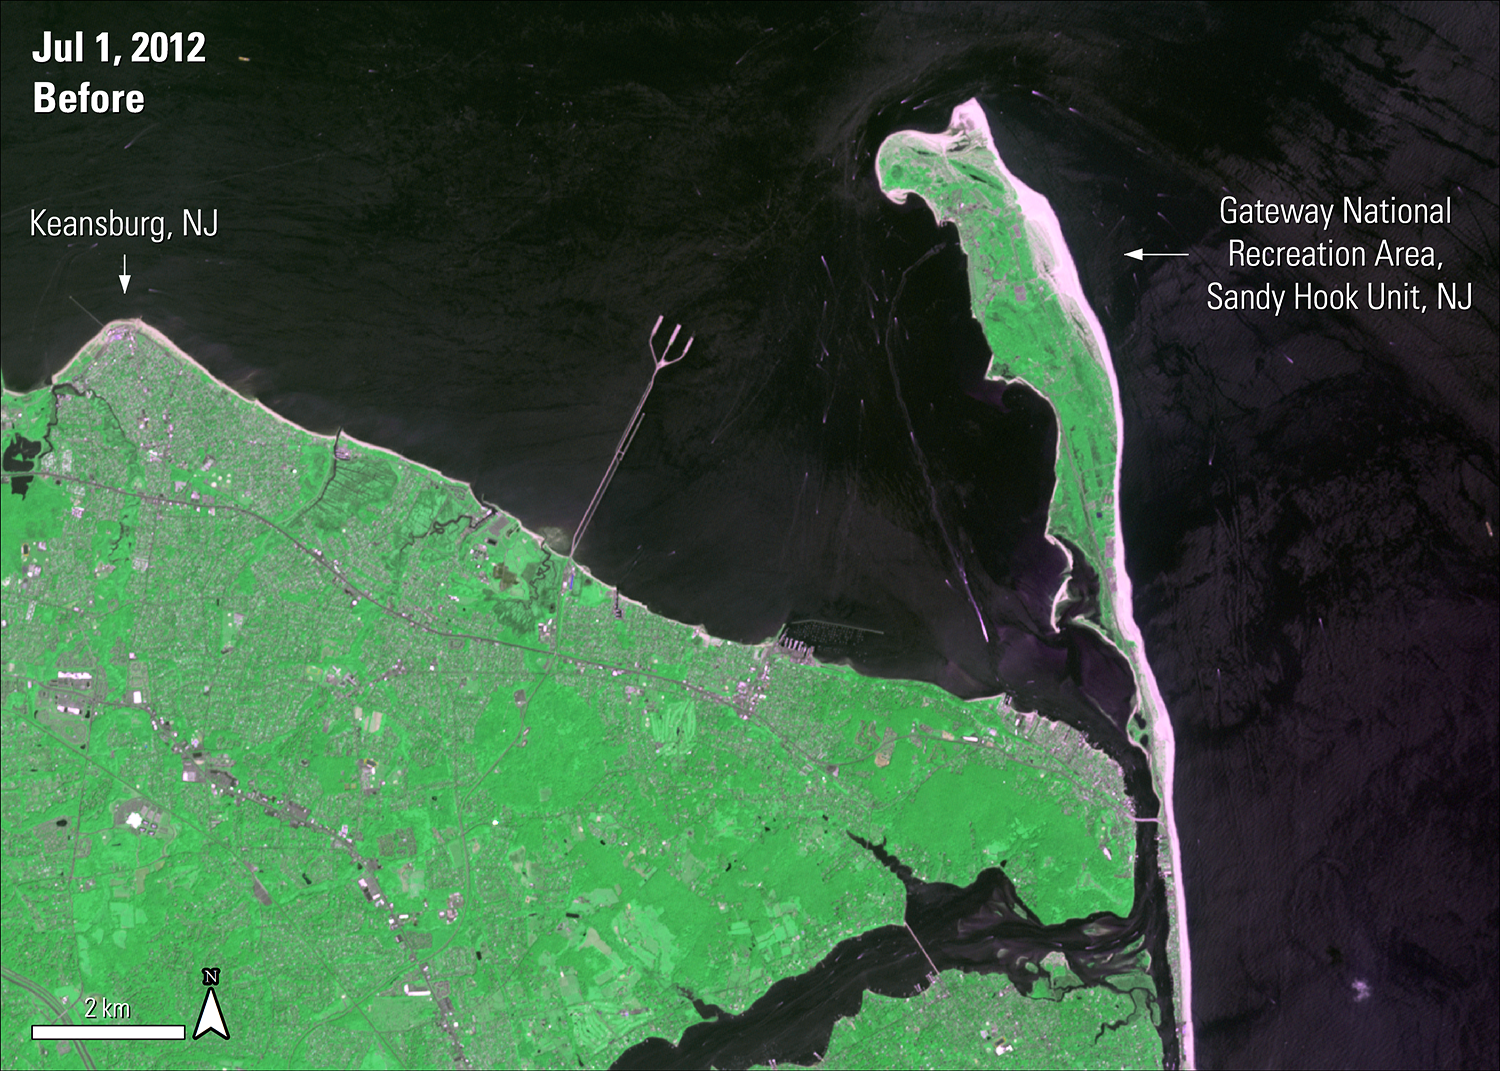 Terra ASTER surface reflectance imagery over part of New Jersey before Hurricane Sandy, acquired July, 2012.